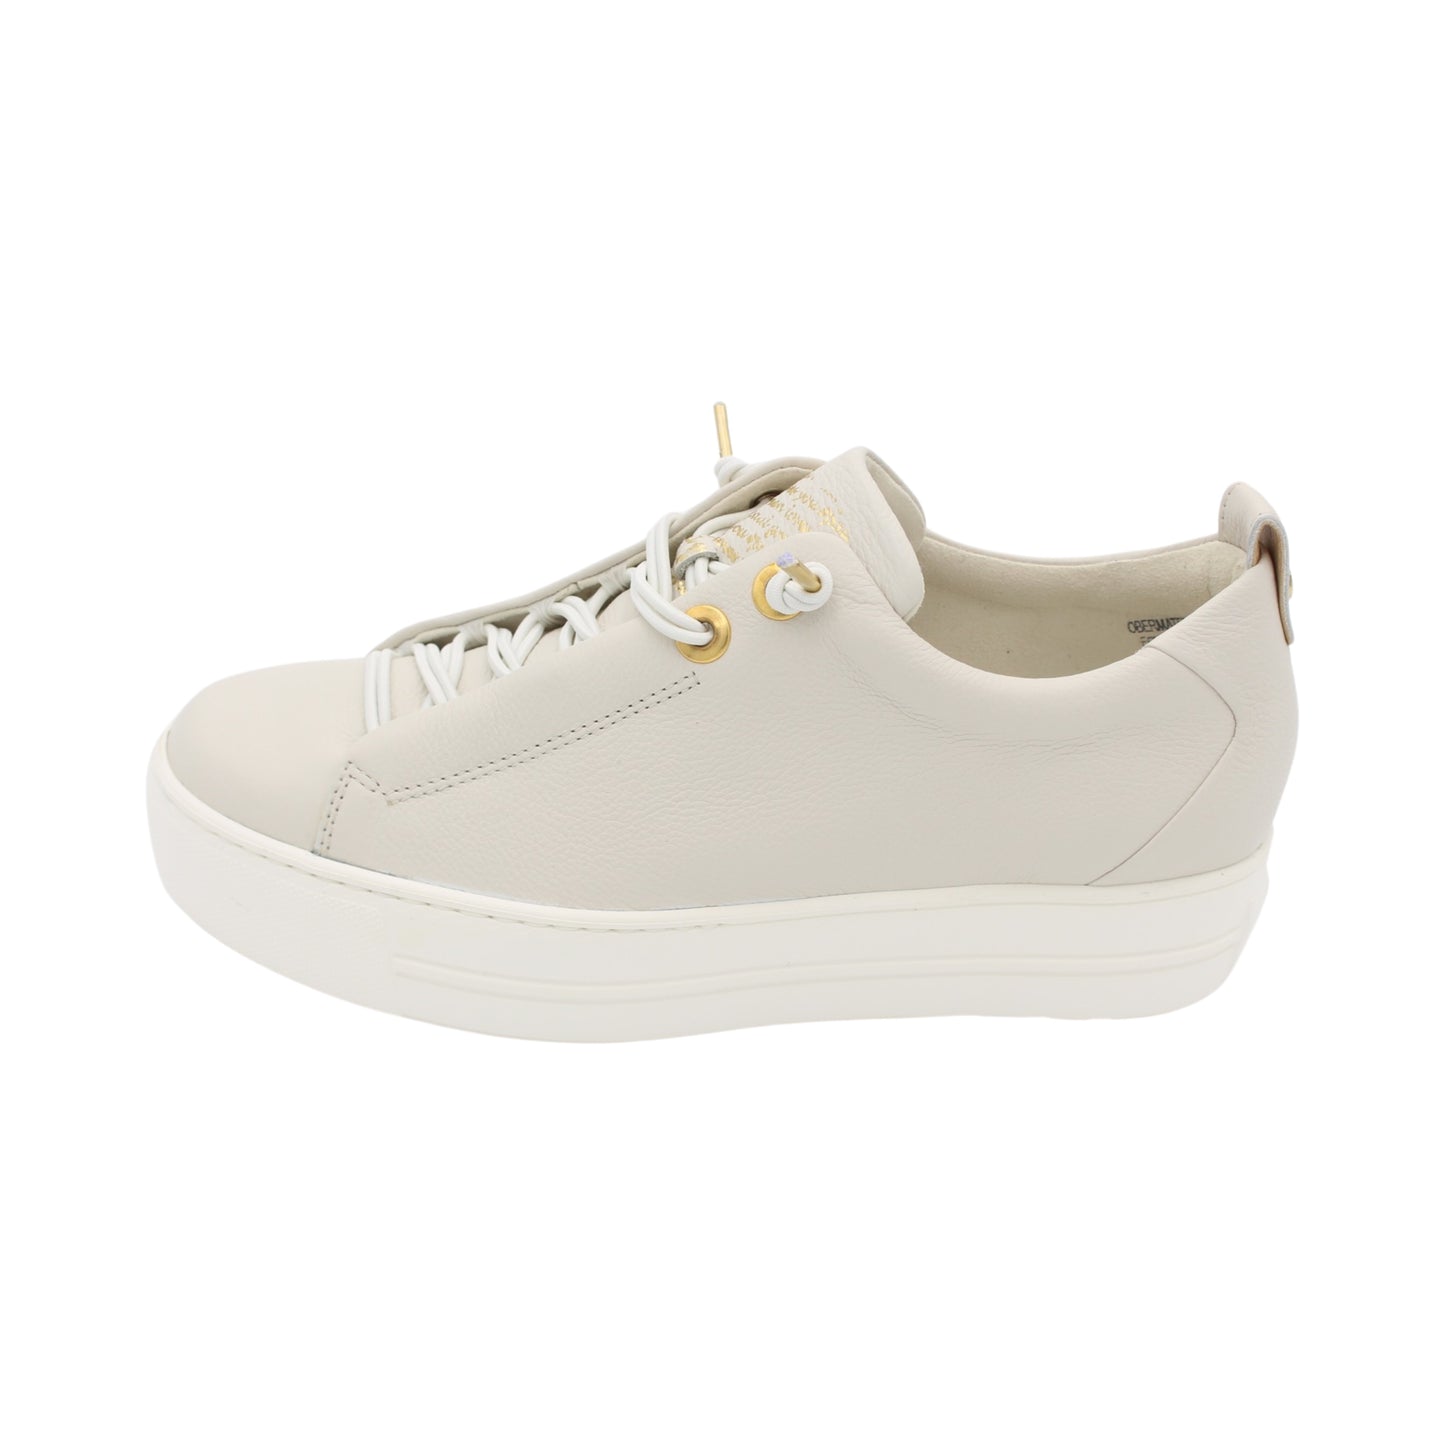 Paul Green - Ladies Shoes Trainers Ivory, Gold (1841)